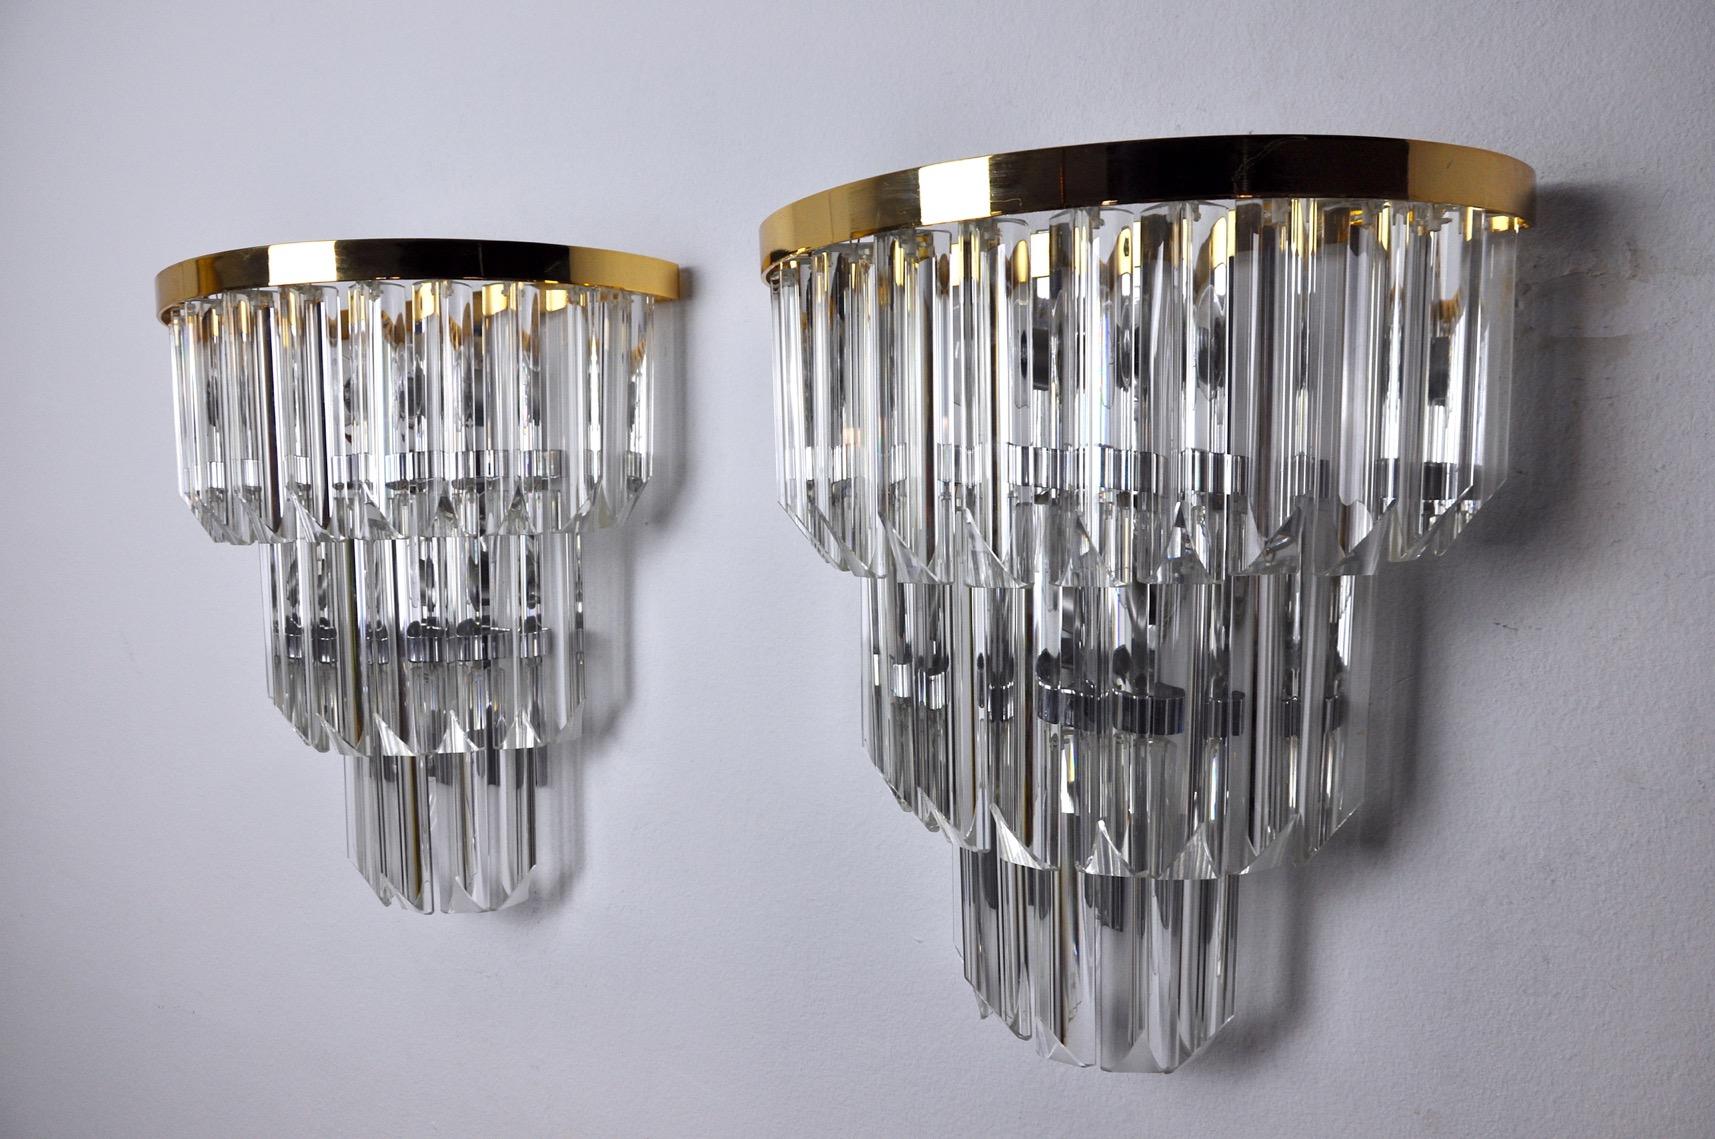 Superb large pair of venini sconces produced in italy in the 70s. Murano glass on 3 levels and gilded metal structure. Unique object that will illuminate wonderfully and bring a real design touch to your interior. Electricity checked, mark of time